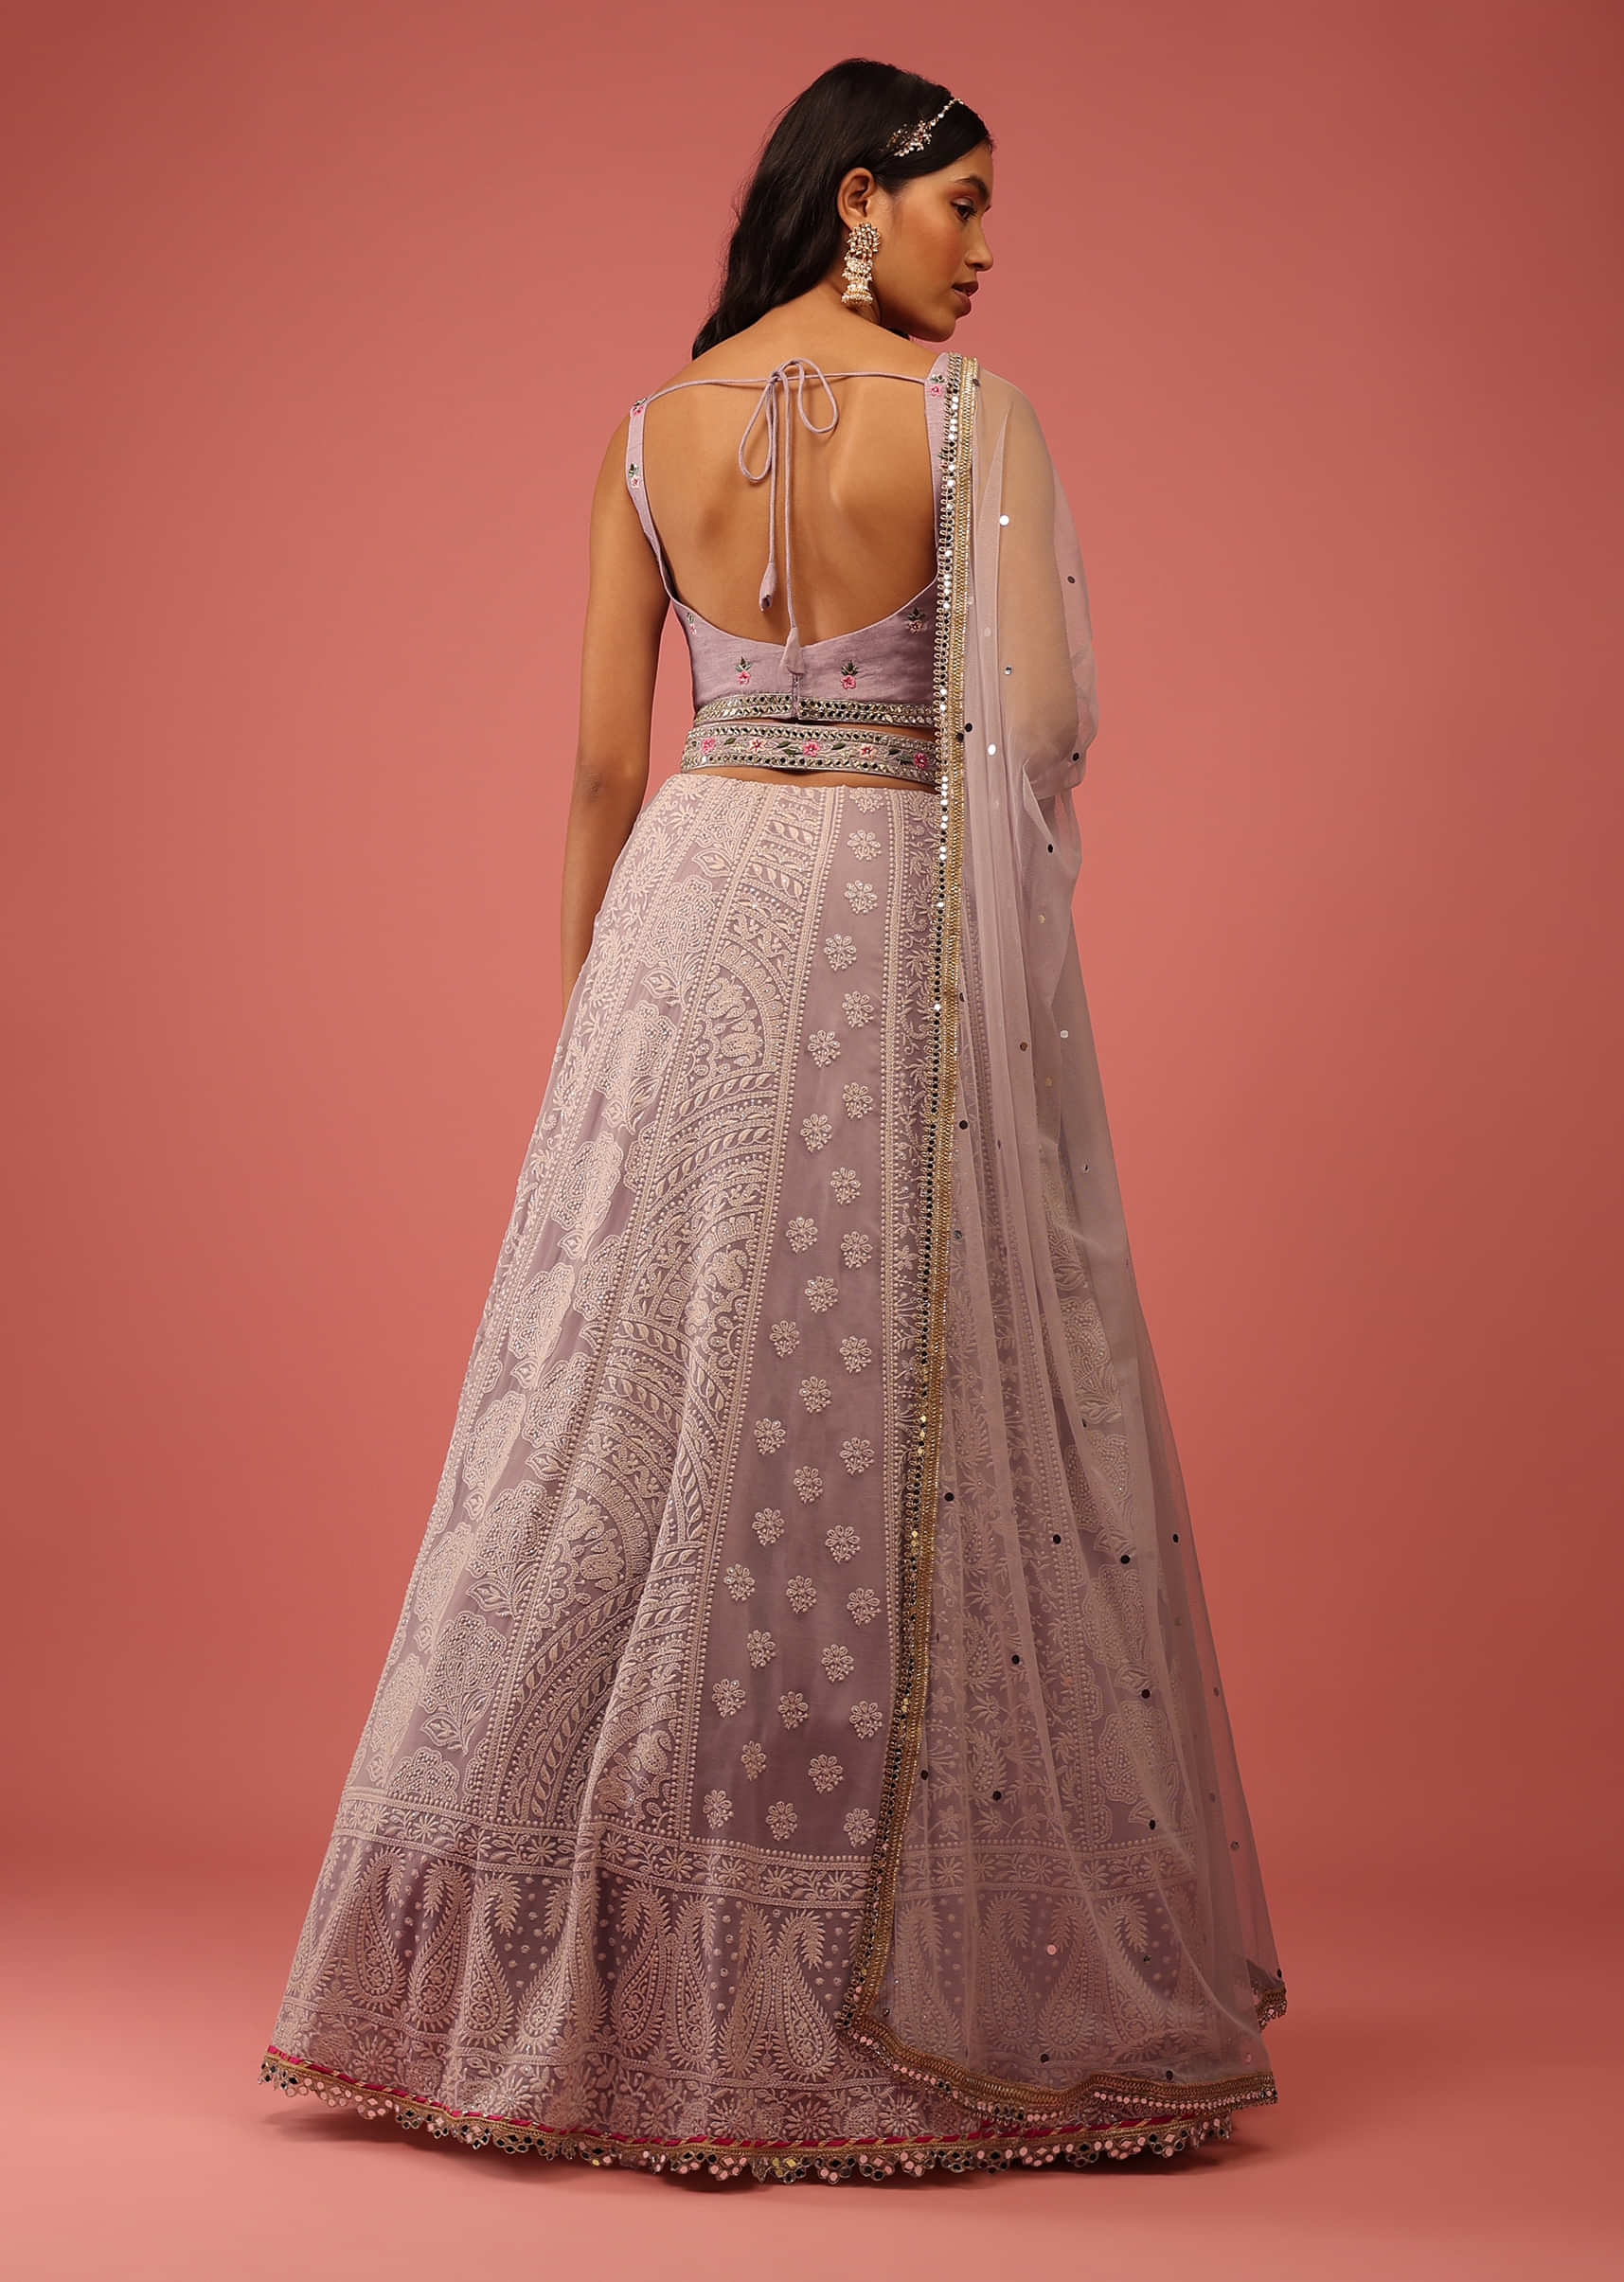 Lavender Purple Lehenga Choli With Lucknowi Thread Work And Multicolor Resham And Mirror Accents